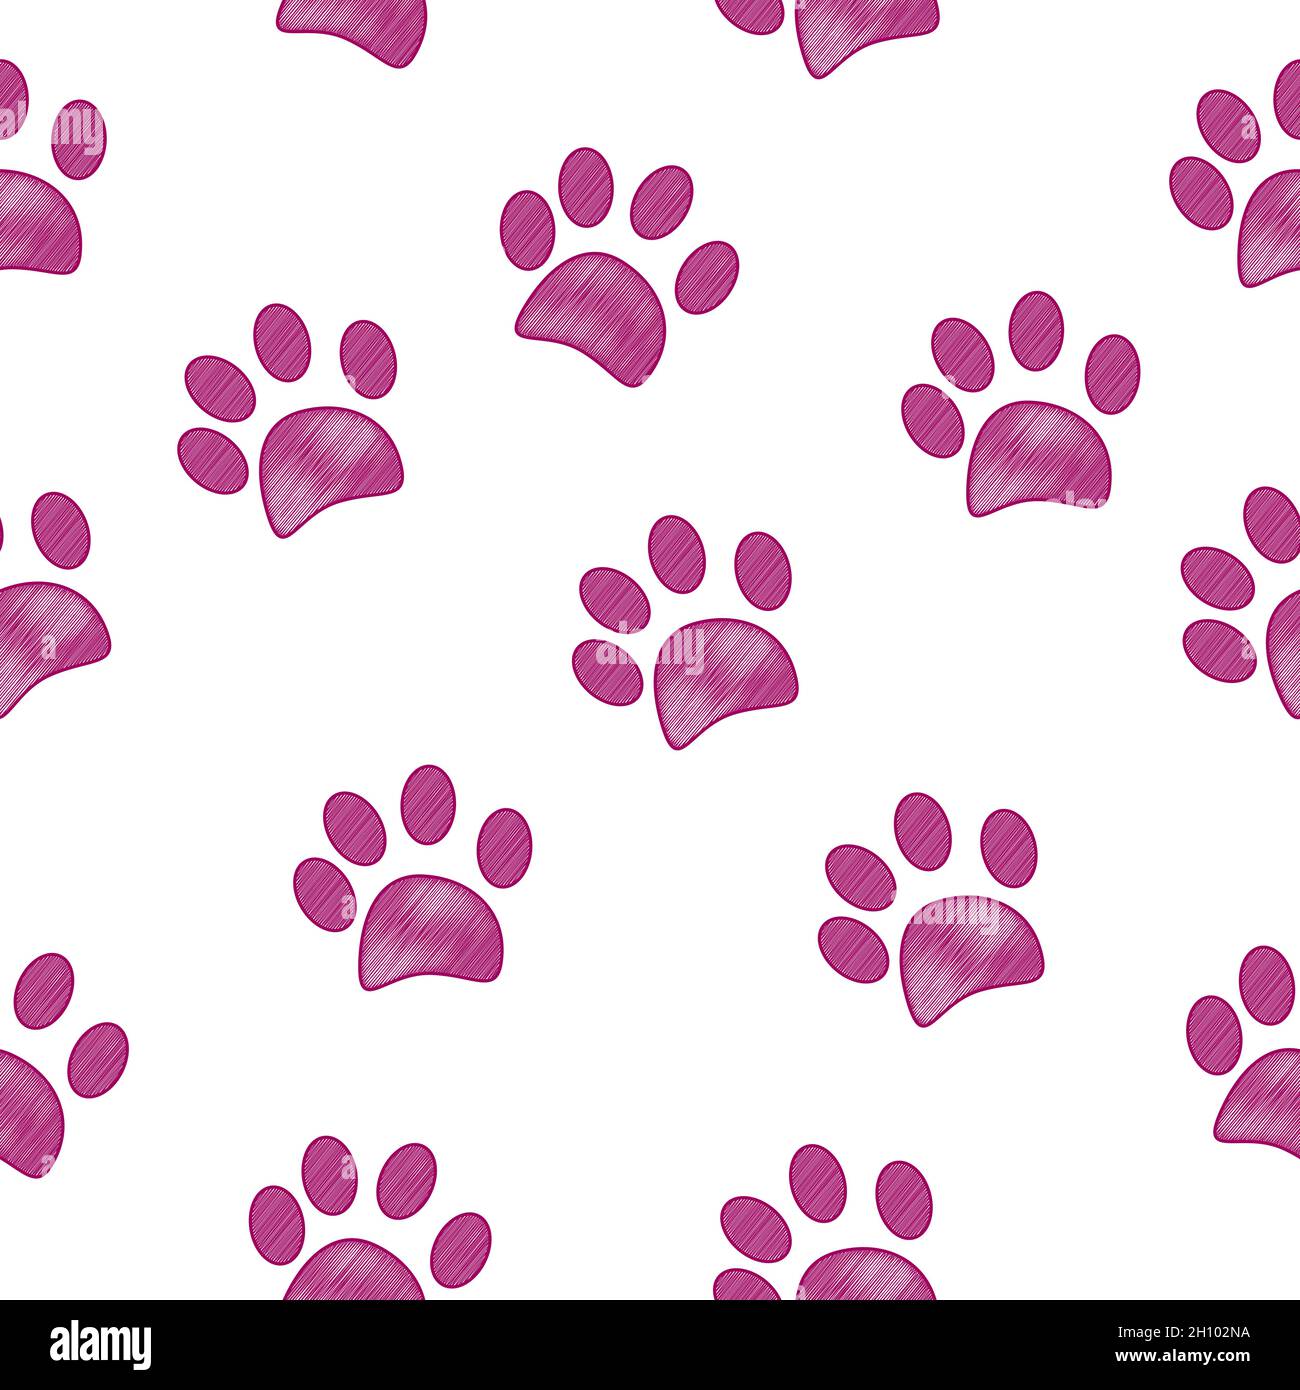 Seamless pattern for textile design. Seamless light pink coloured paw print background Stock Vector